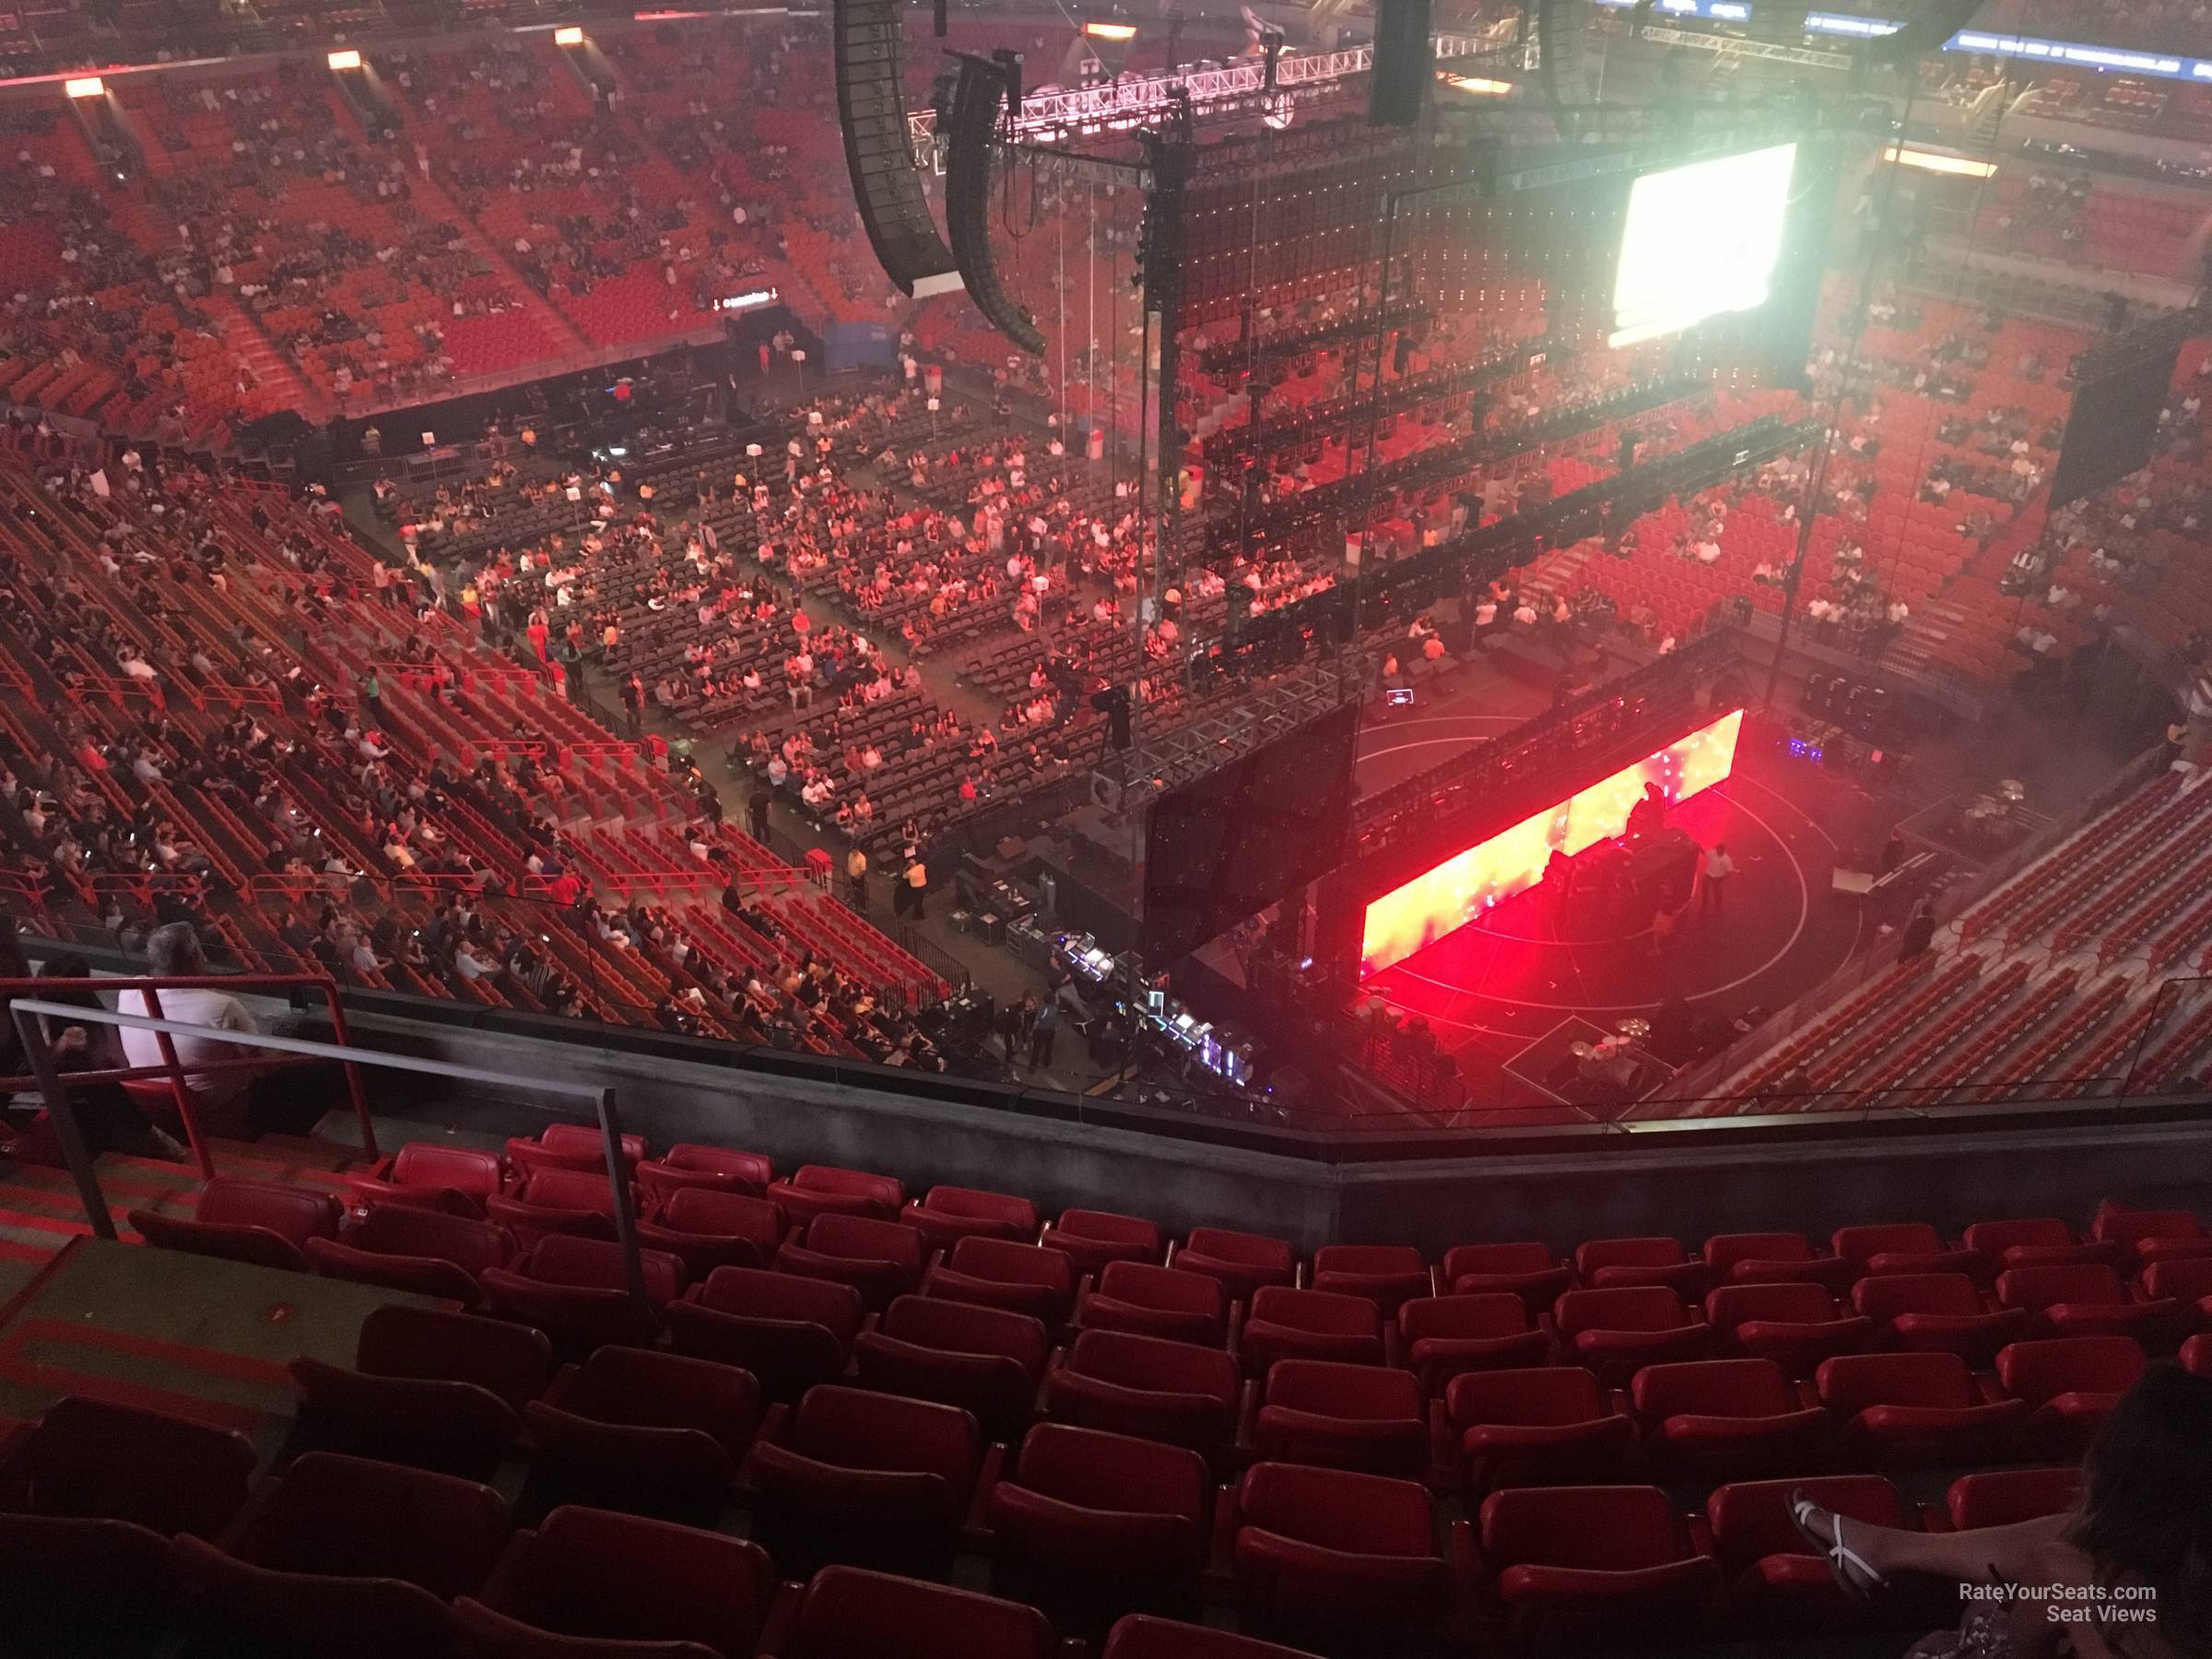 section 409, row 10 seat view  for concert - ftx arena